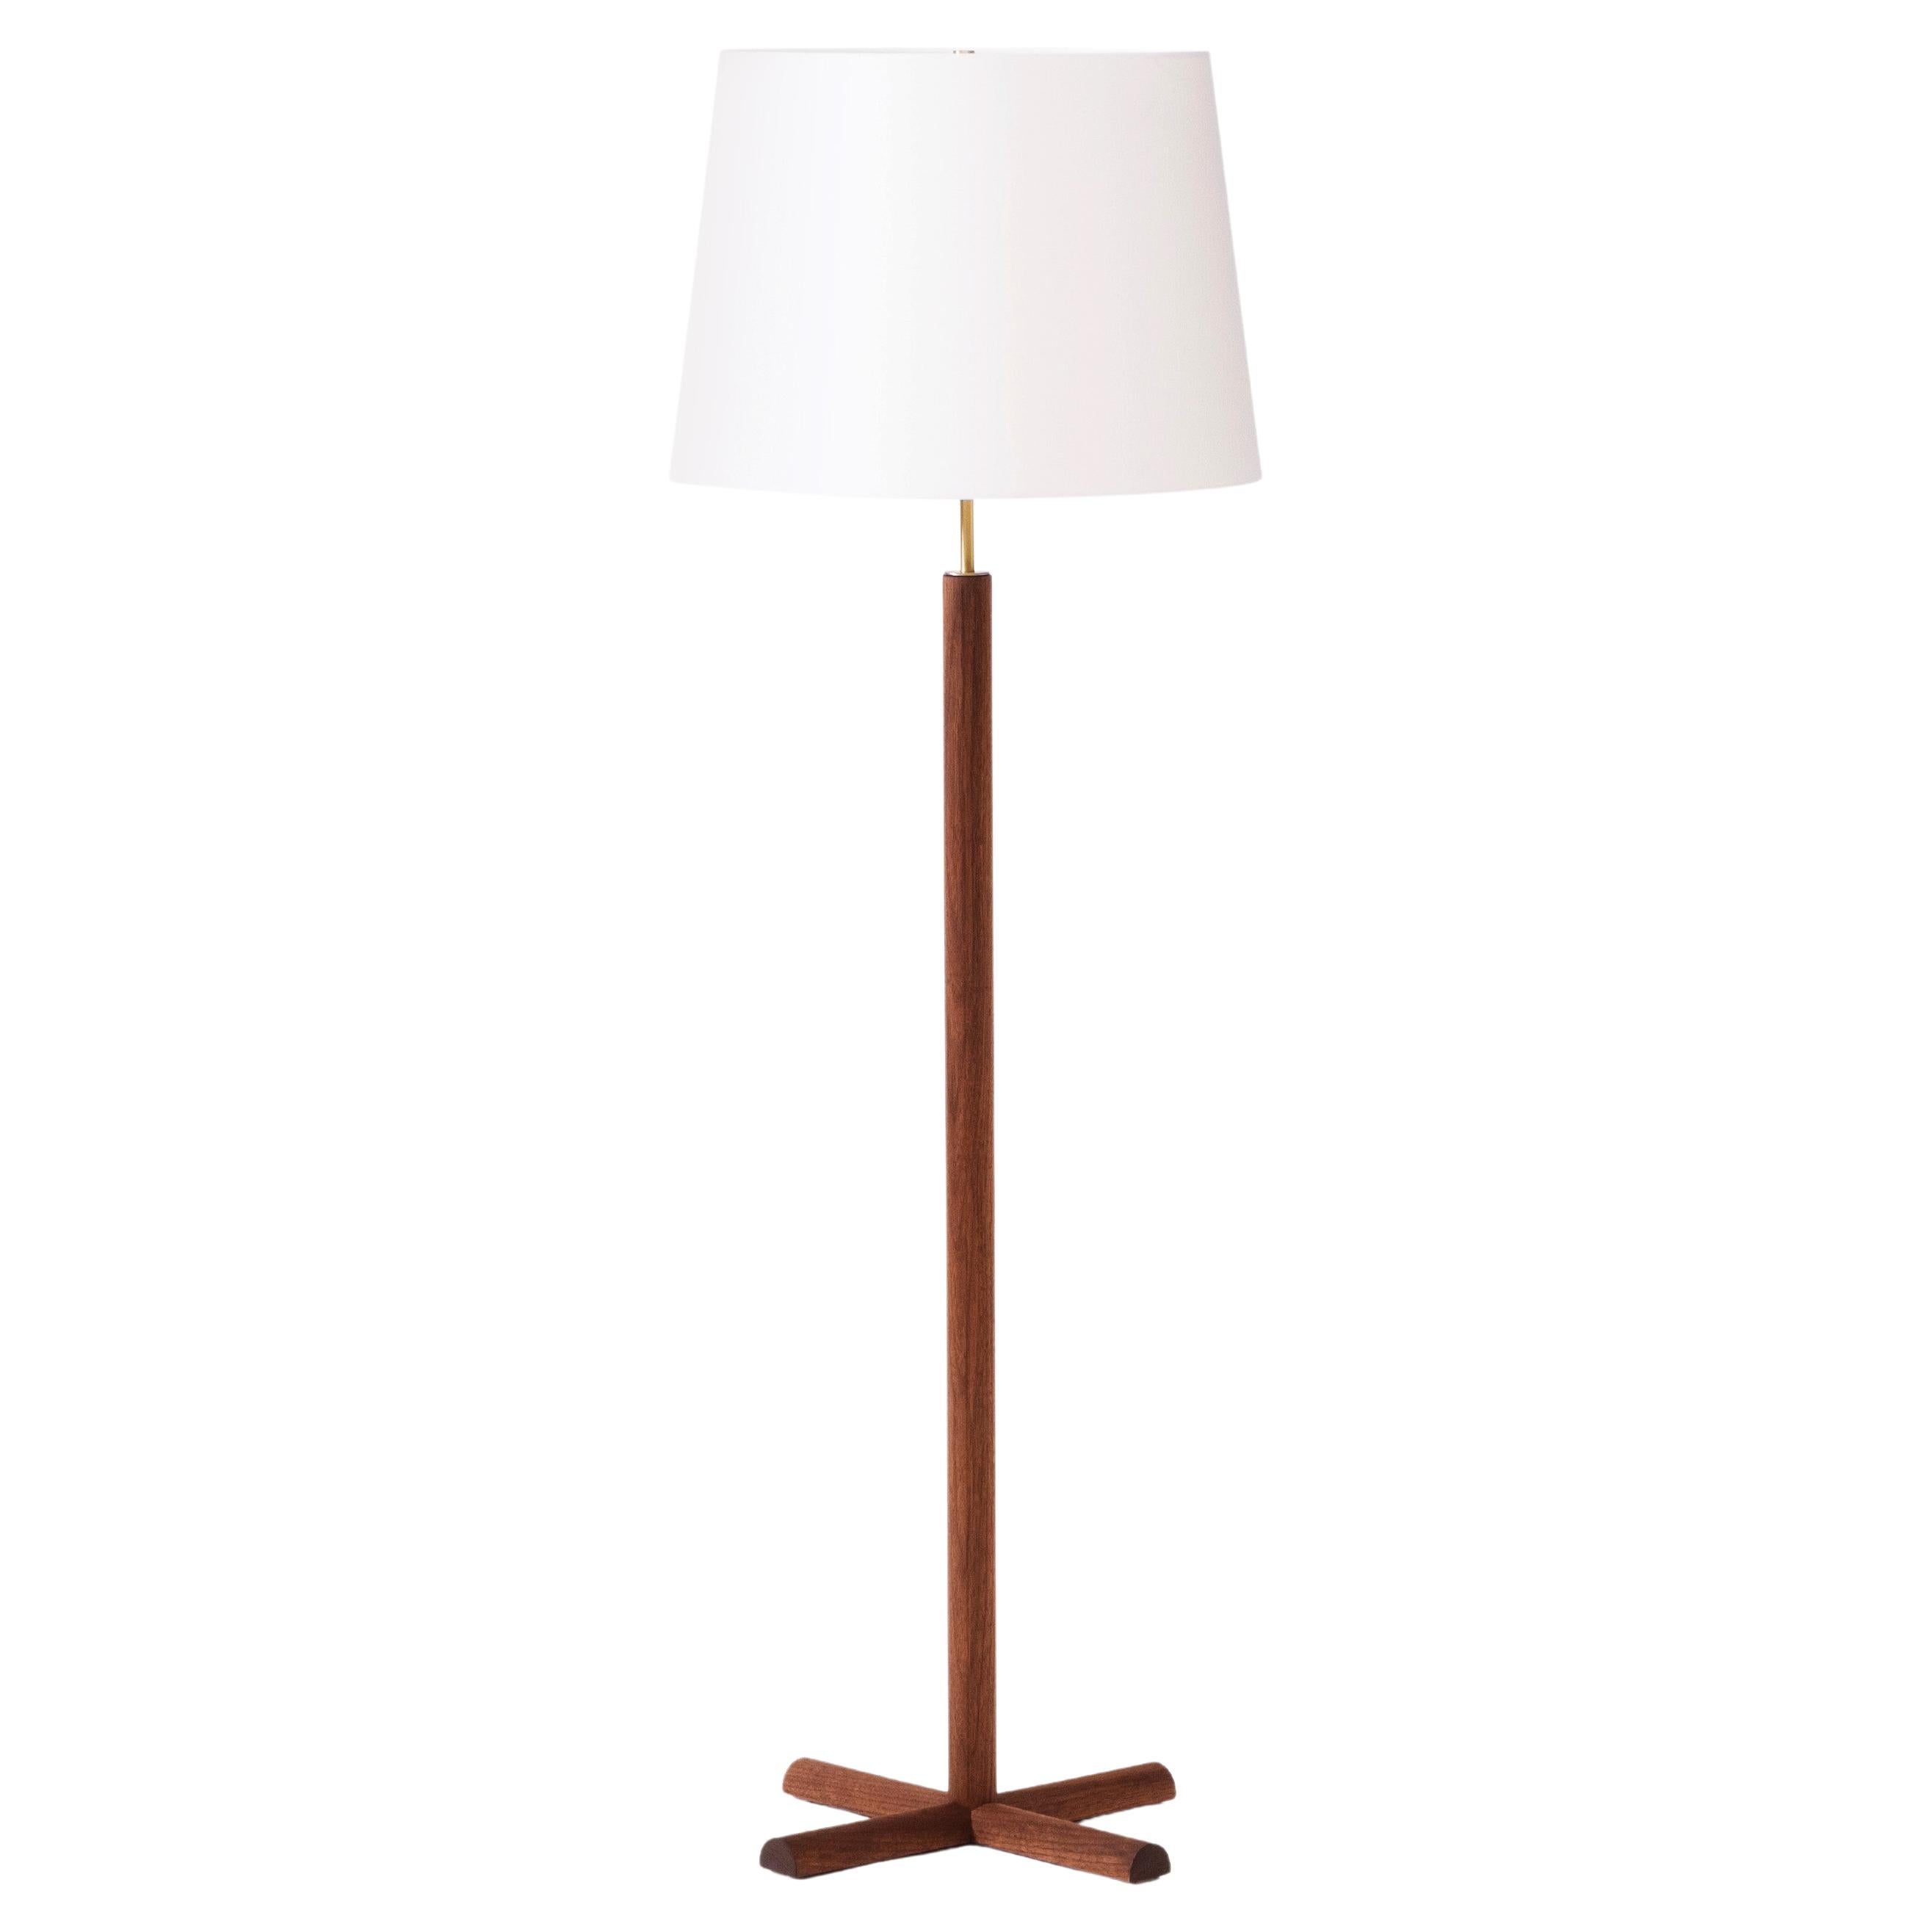 Modern Floor Lamp with Walnut Column Base and Conical Shade